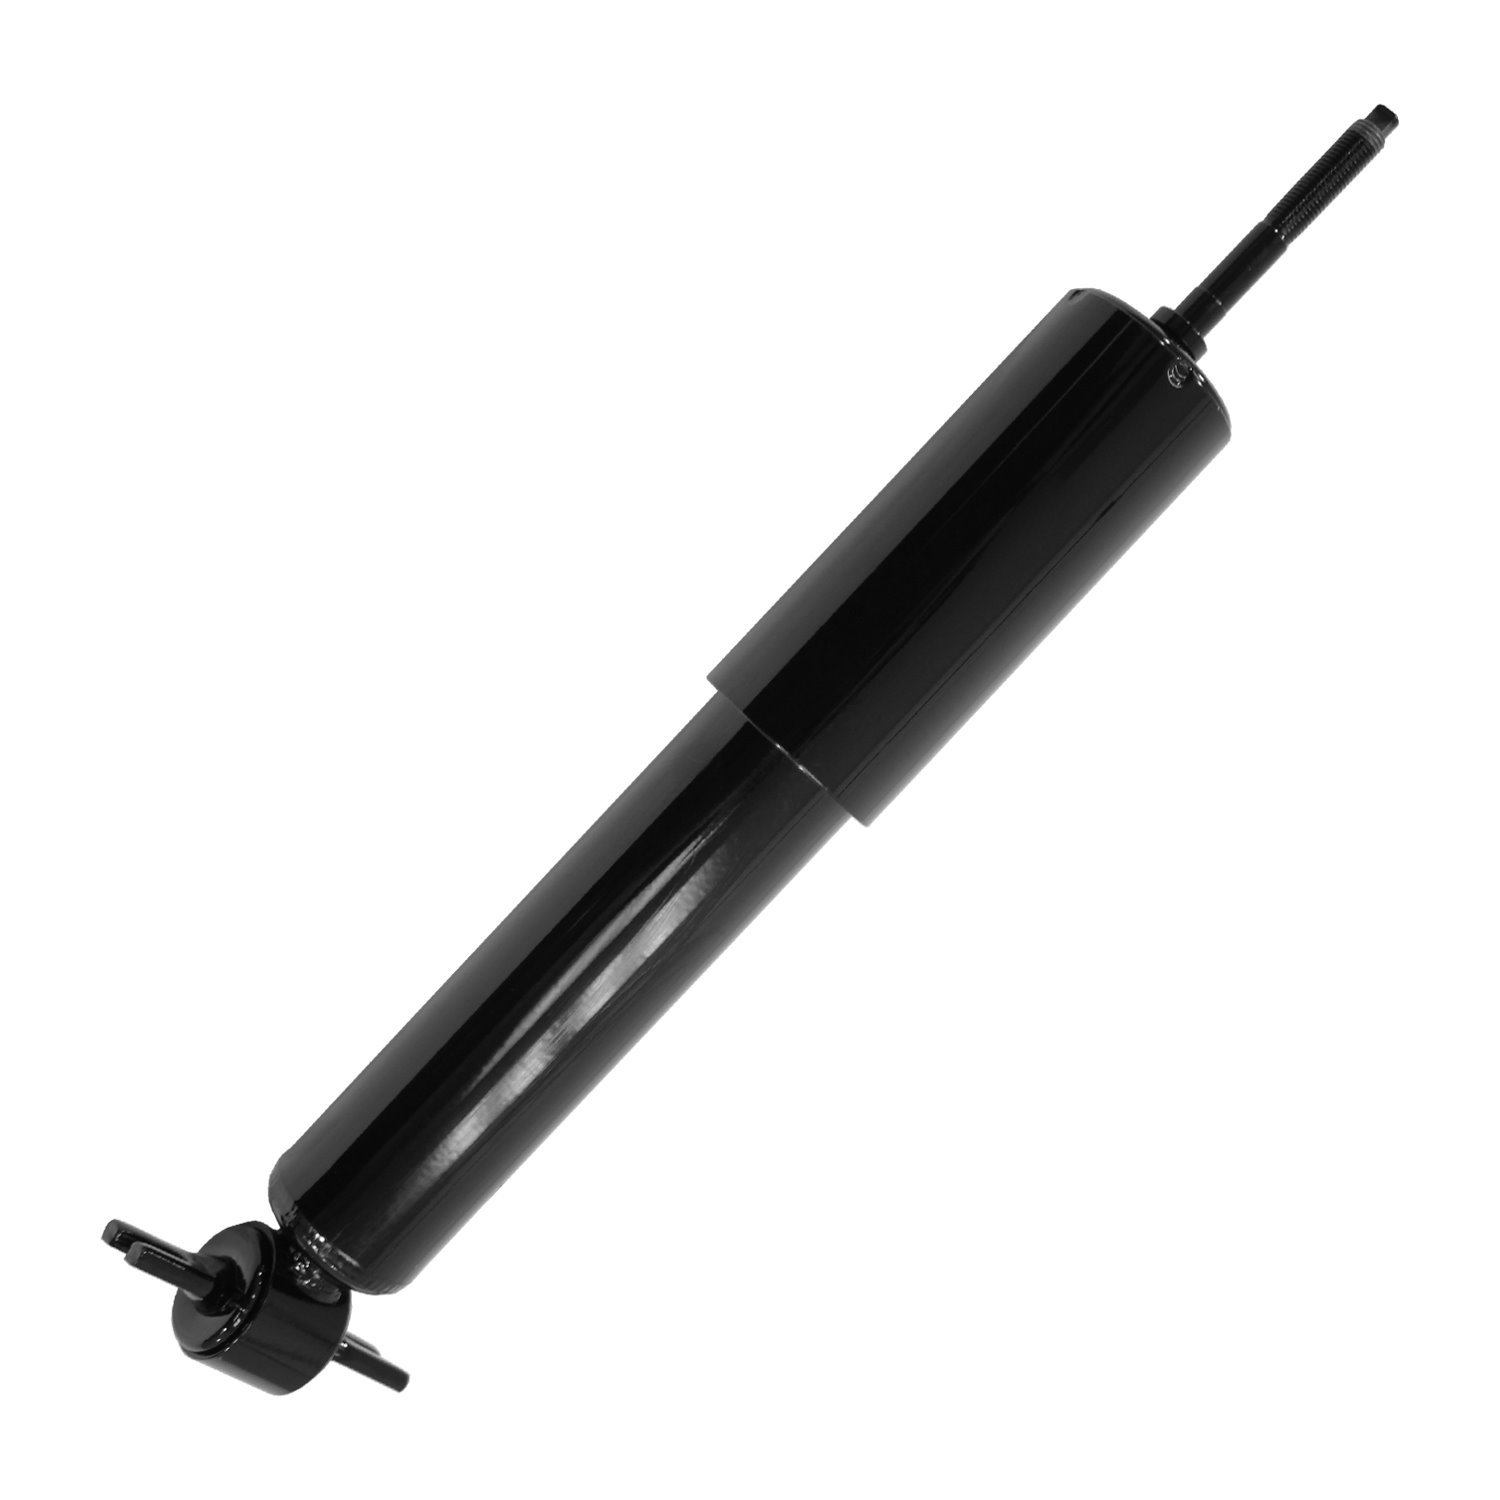 211130 Gas Charged Shock Absorber Fits Select Chevy Express 1500, Chevy Express 2500, GMC Savana 1500, GMC Savana 2500